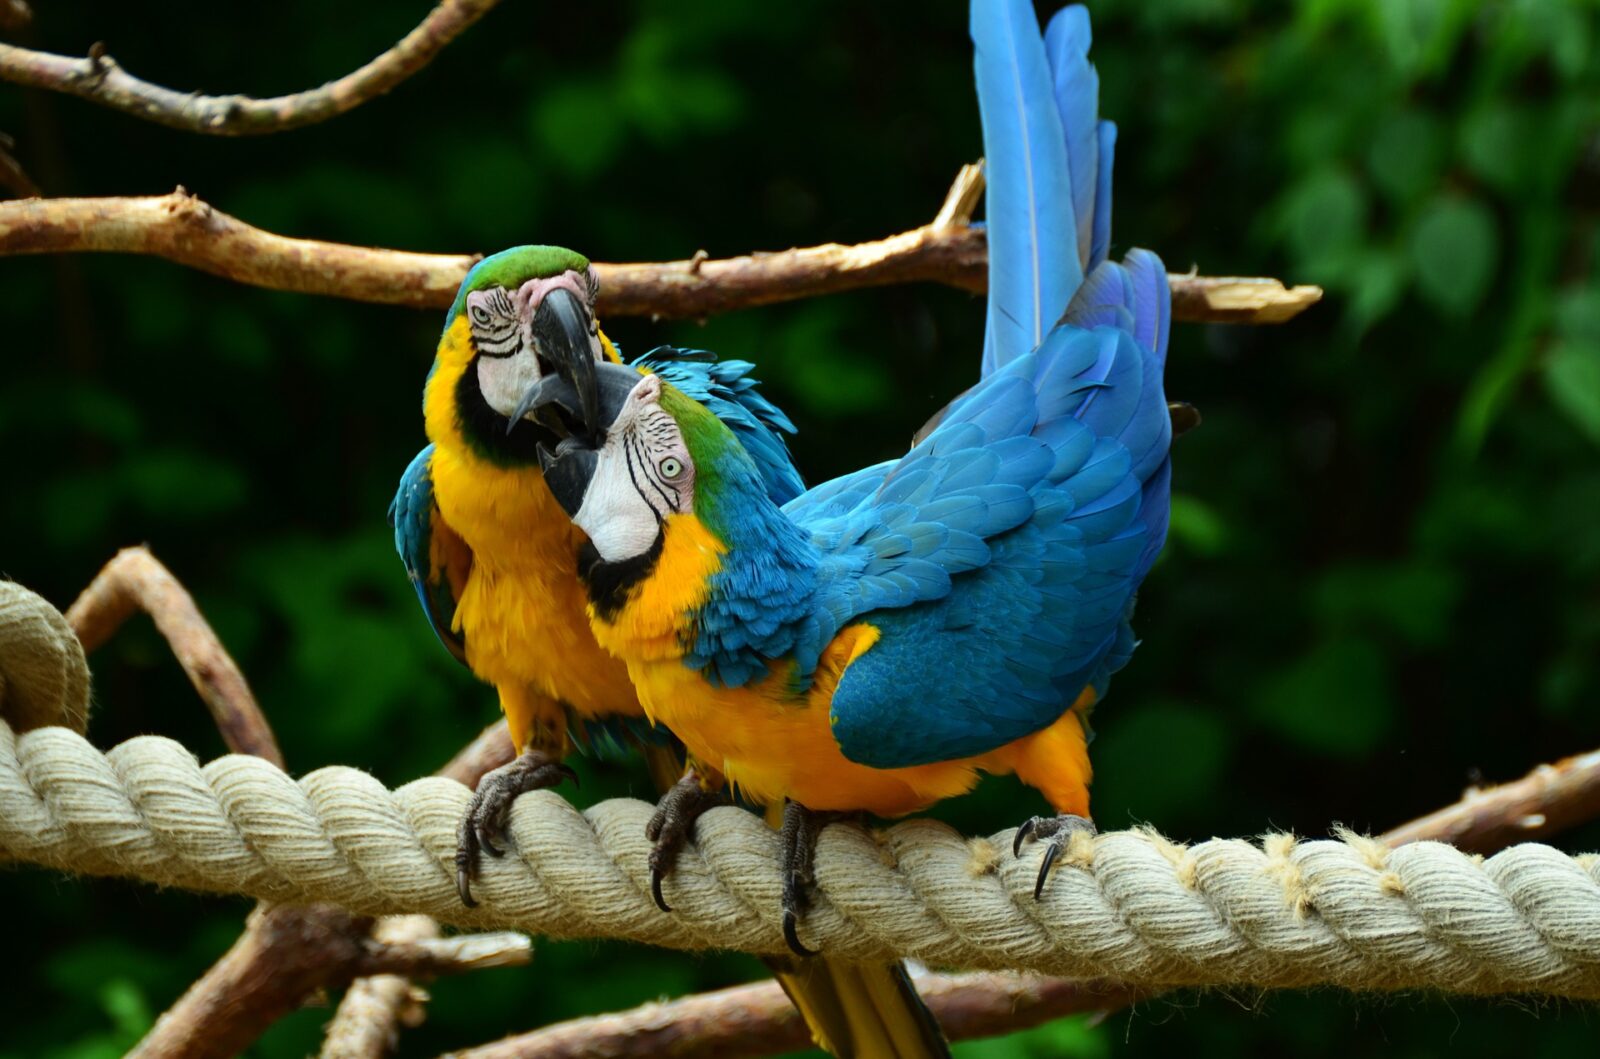 Facts About Macaws in The Rainforest